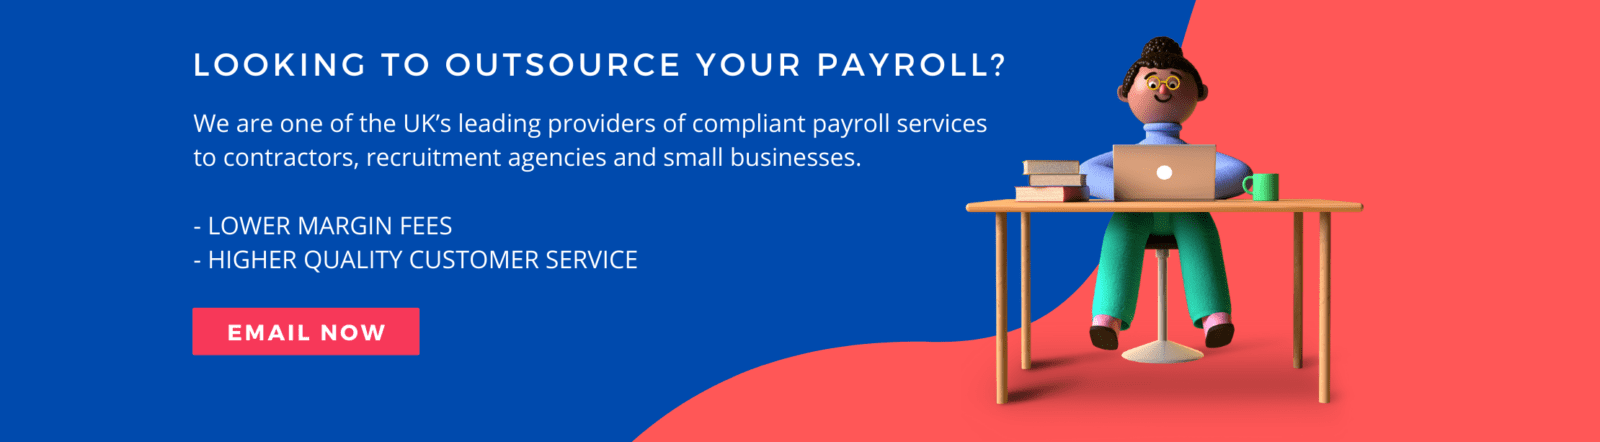 Outsource your payroll to ePayMe advert